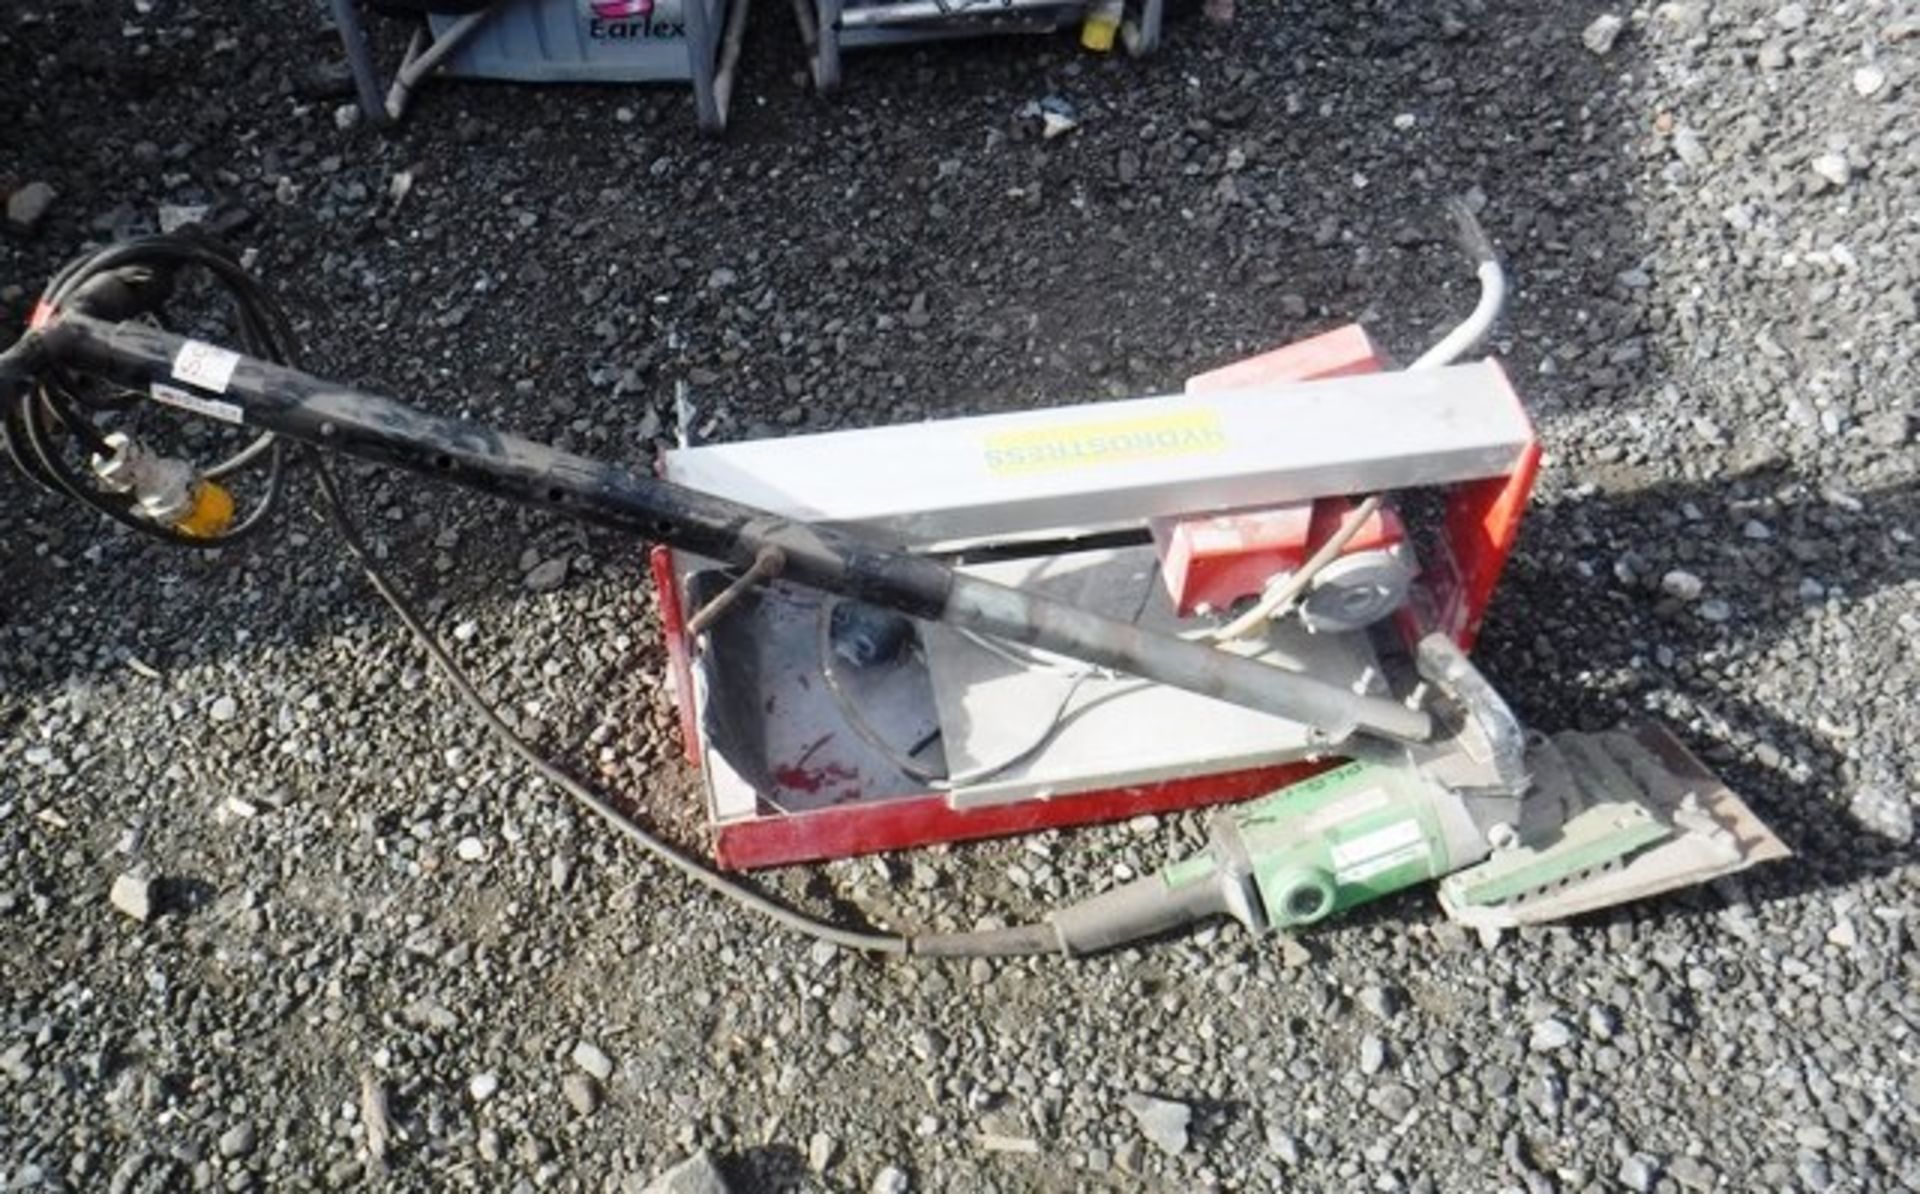 1 TILE CUTTER SP32-003, 1 TILE LIFTER SP68-001**REPOSSESSED - DIRECT FROM FINANCE COMPANY**